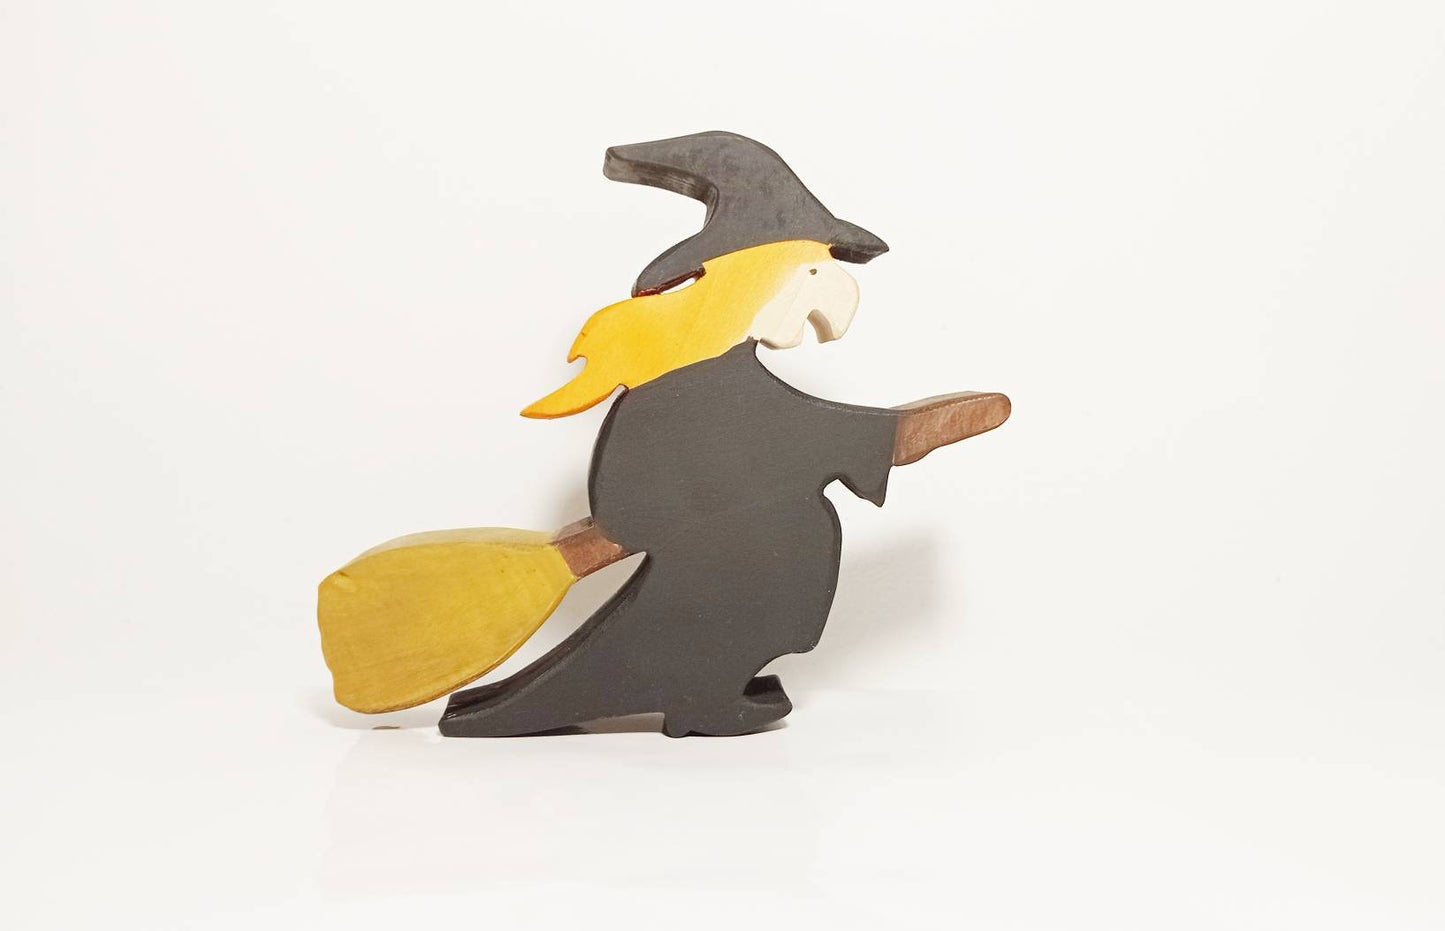 Witch, waldorf witch toy, wooden witch figurine, halloween decoration, wooden witch toy, halloween decor, open ended play, gift for kids